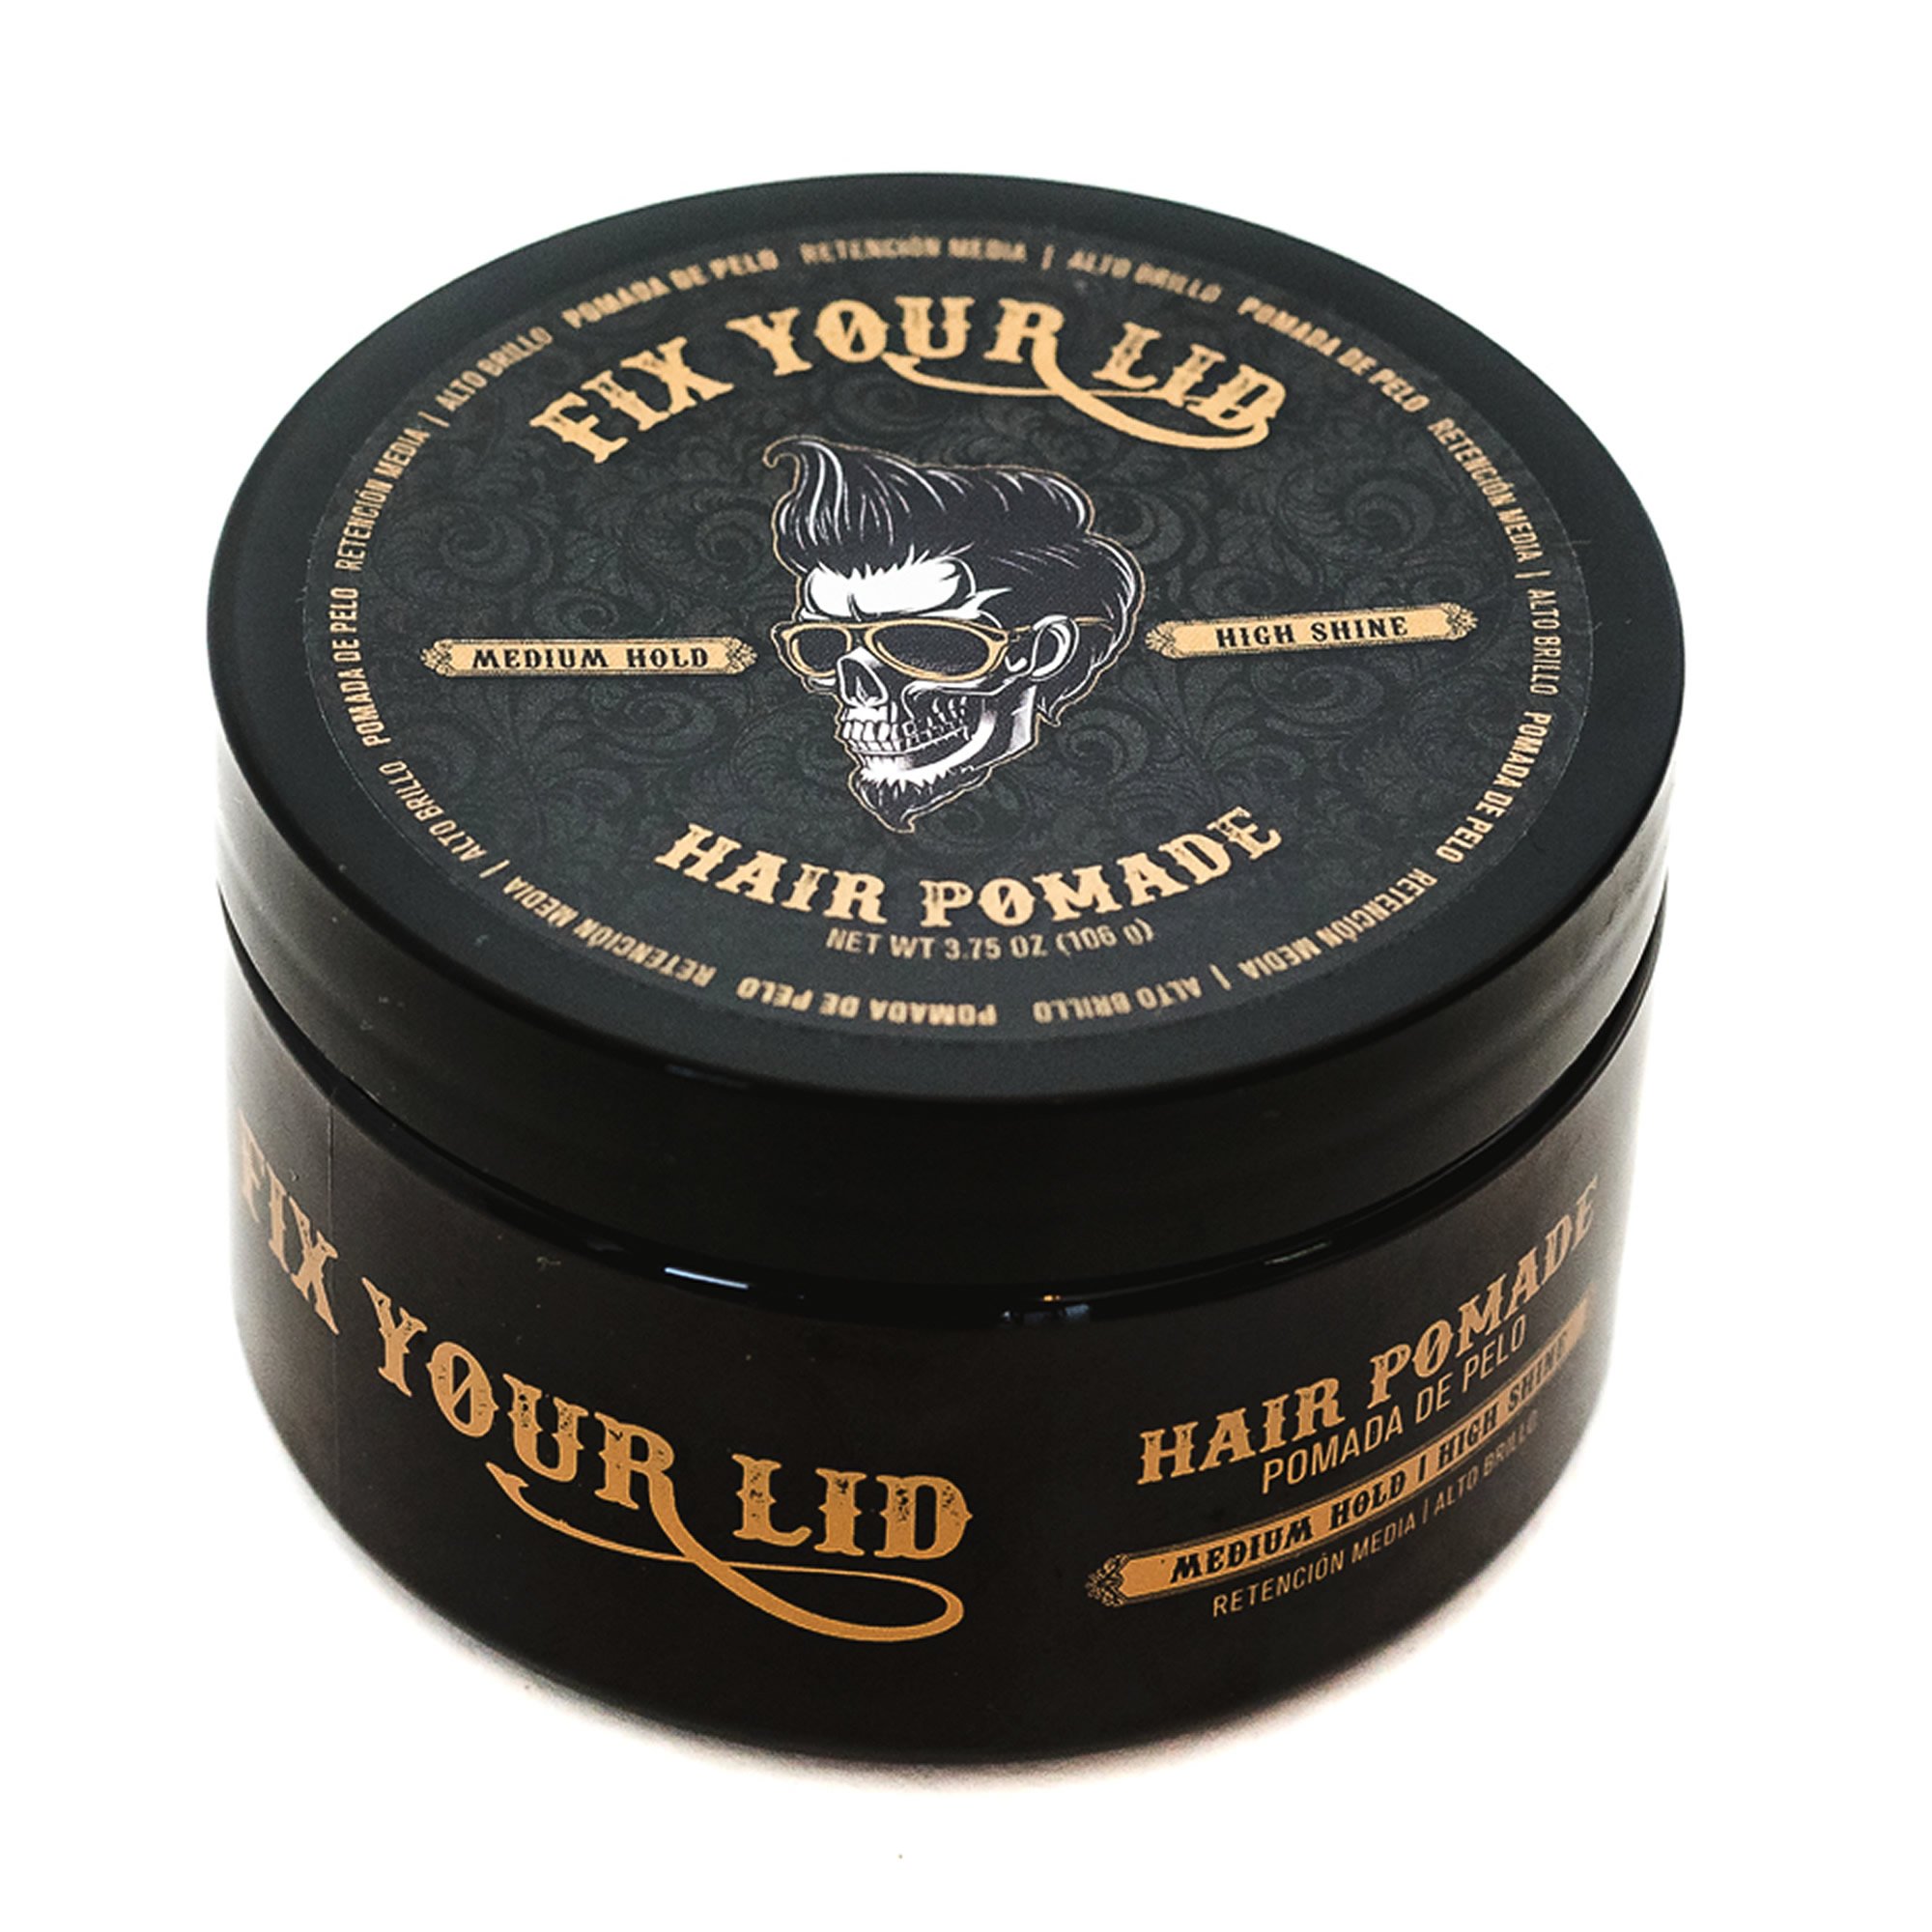 Fix Your Lid Firm Hold Styling Gel - 8.5 fl oz